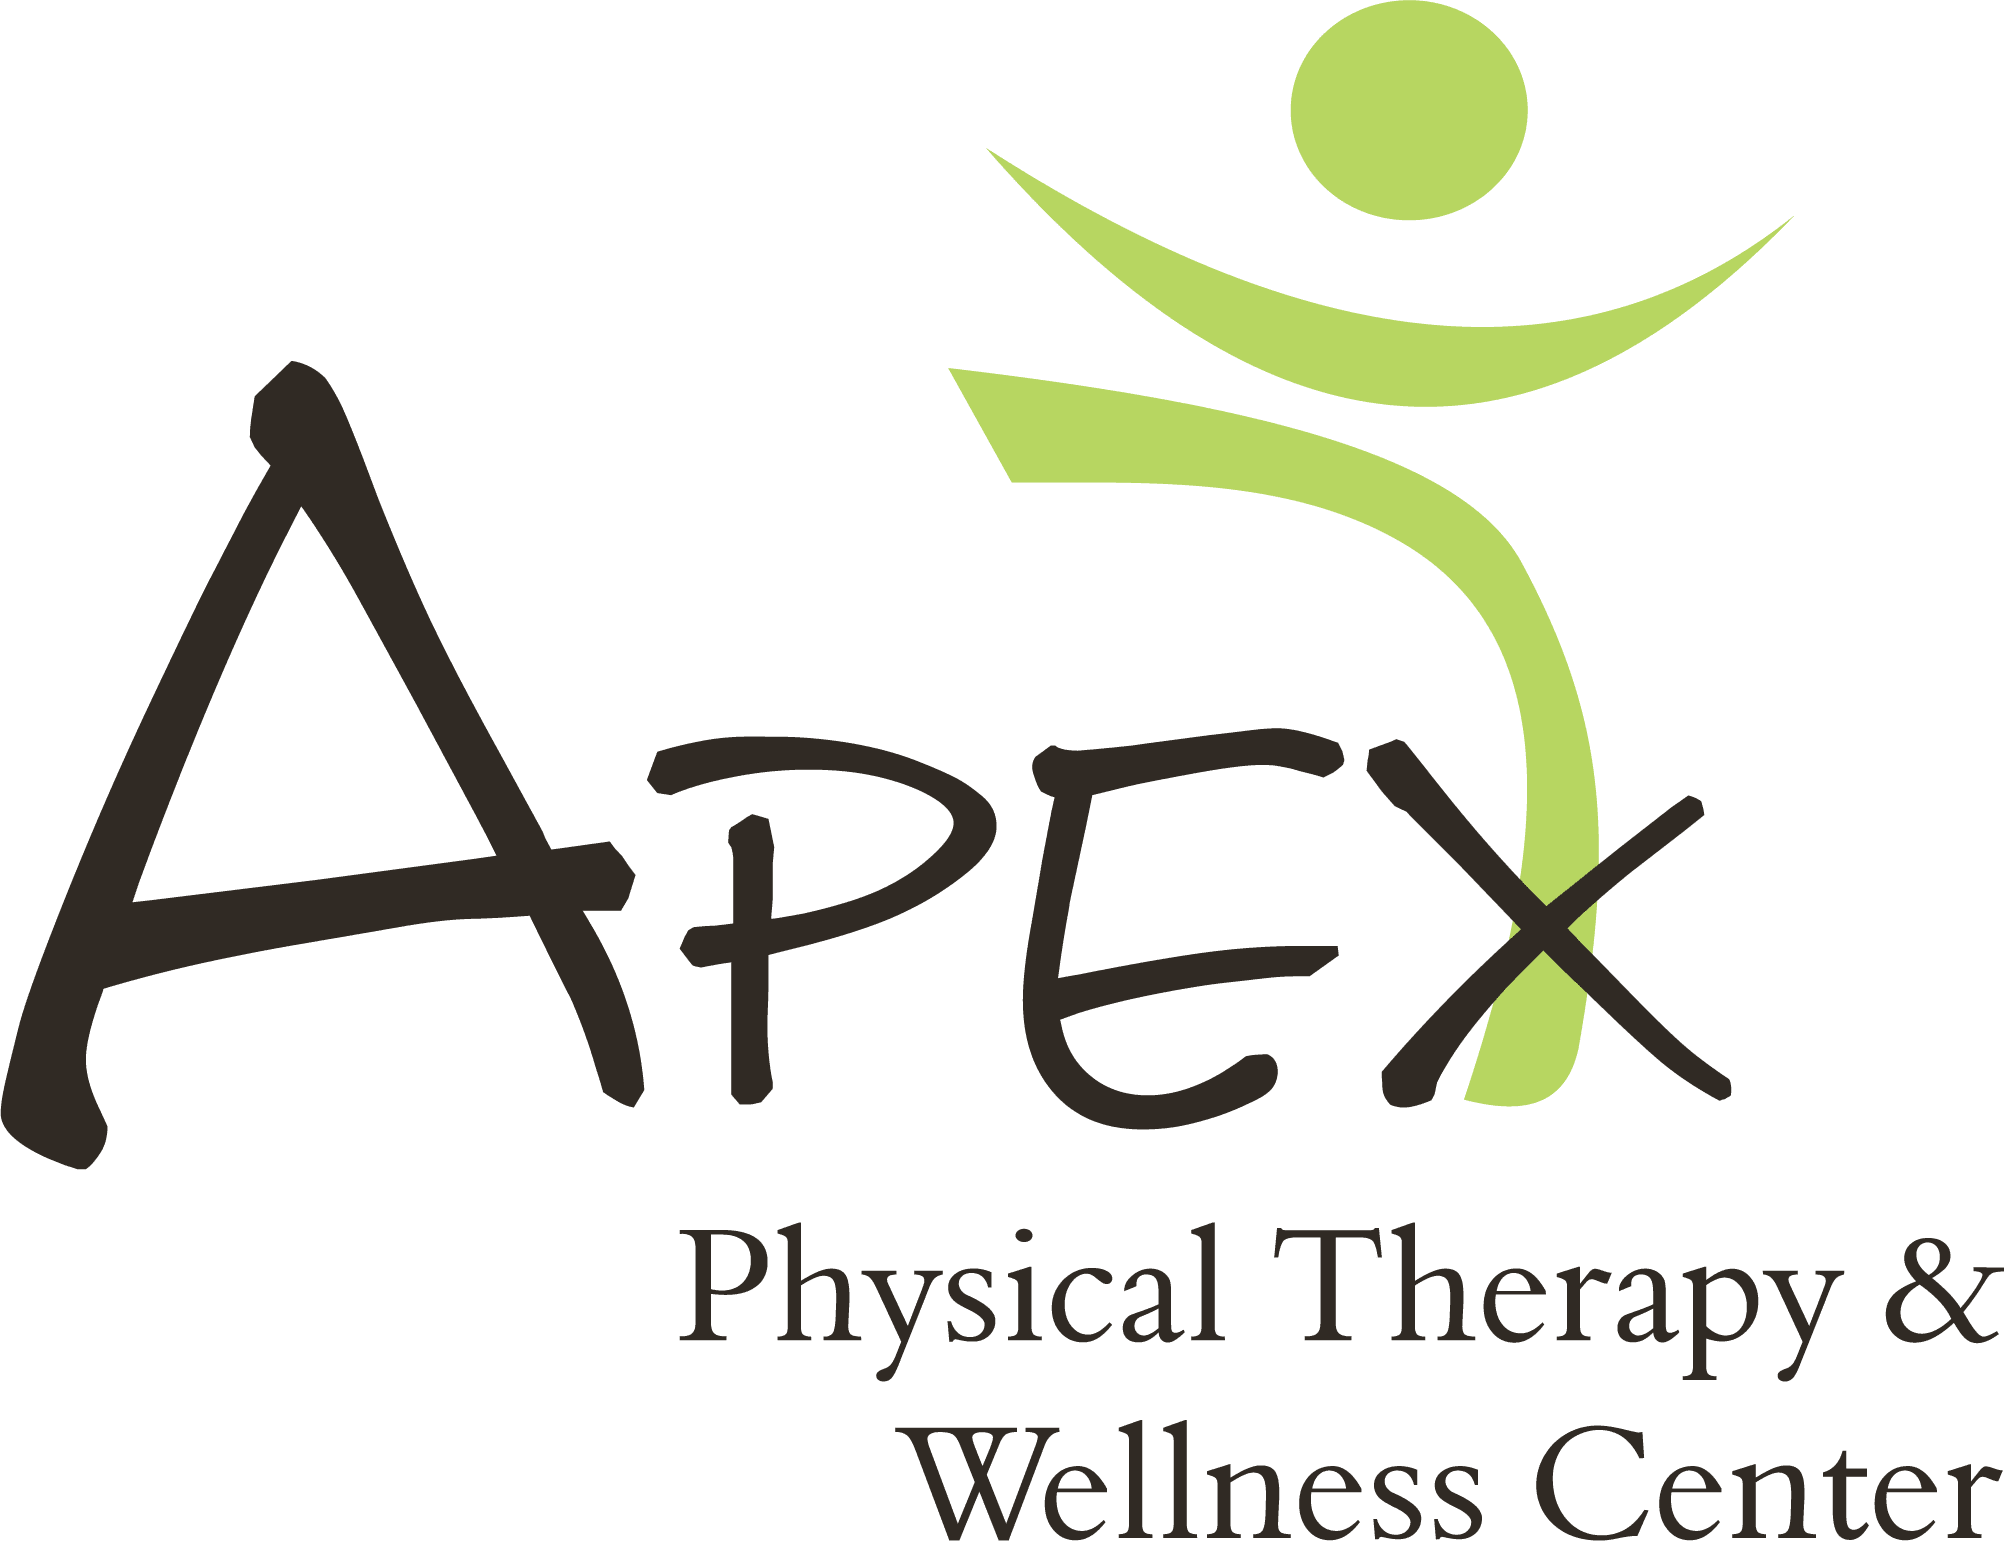 Logo of apex physical therapy & wellness center, featuring an abstract figure in motion above the text, symbolizing health and vitality.